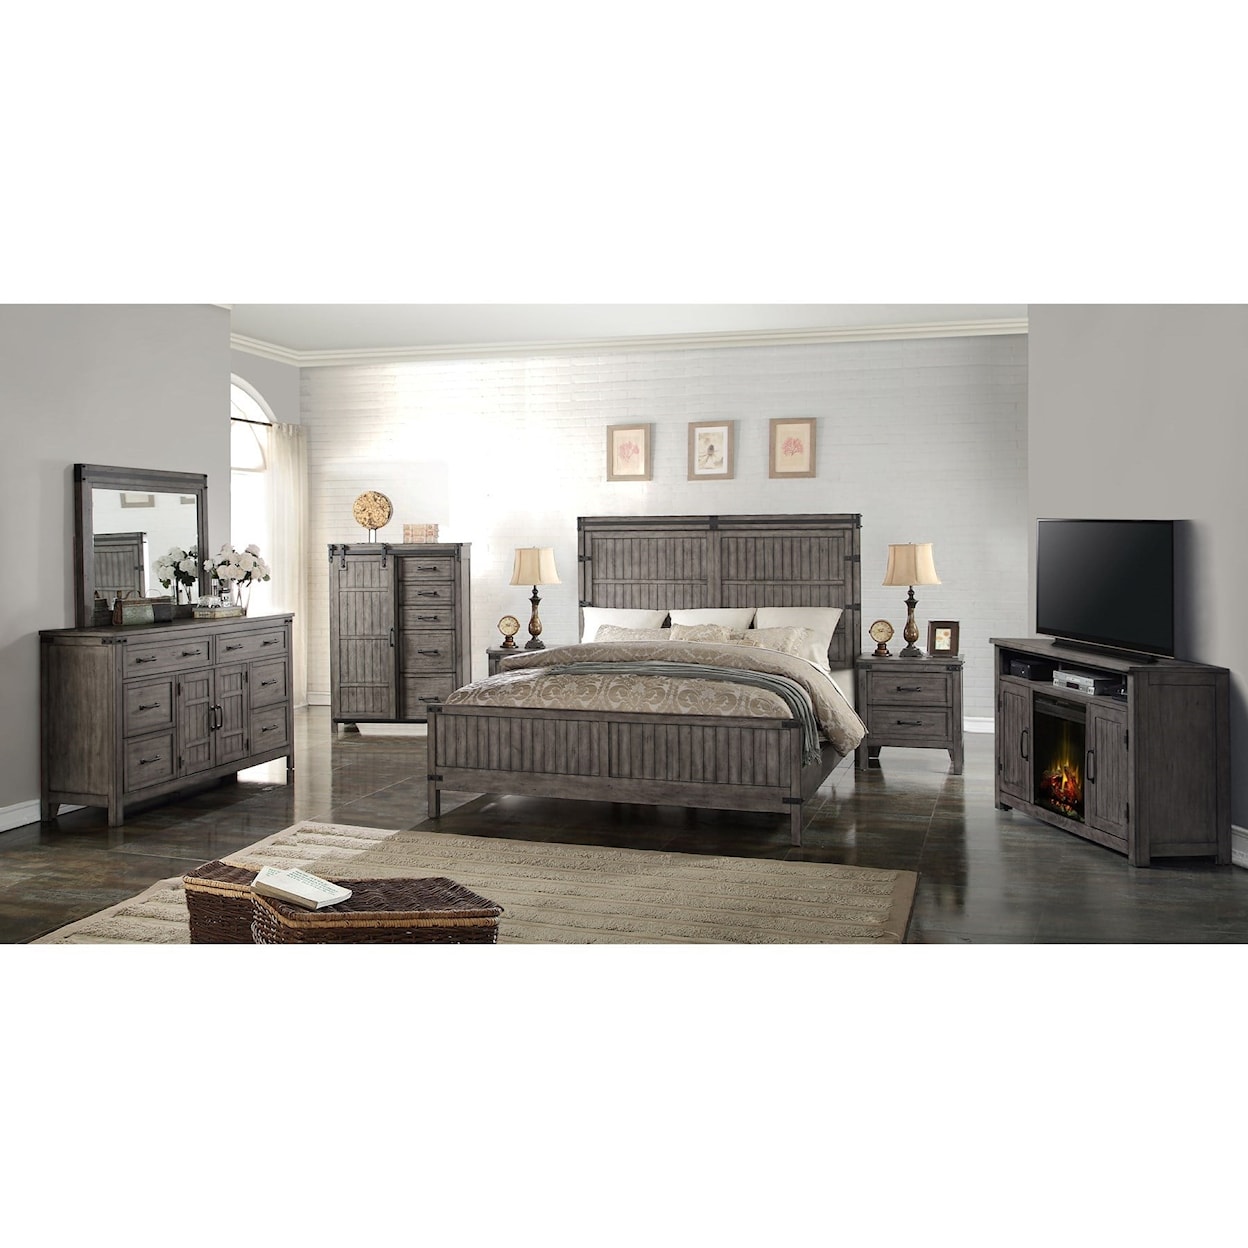 Legends Furniture Storehouse Collection King Slatted Panel Bed